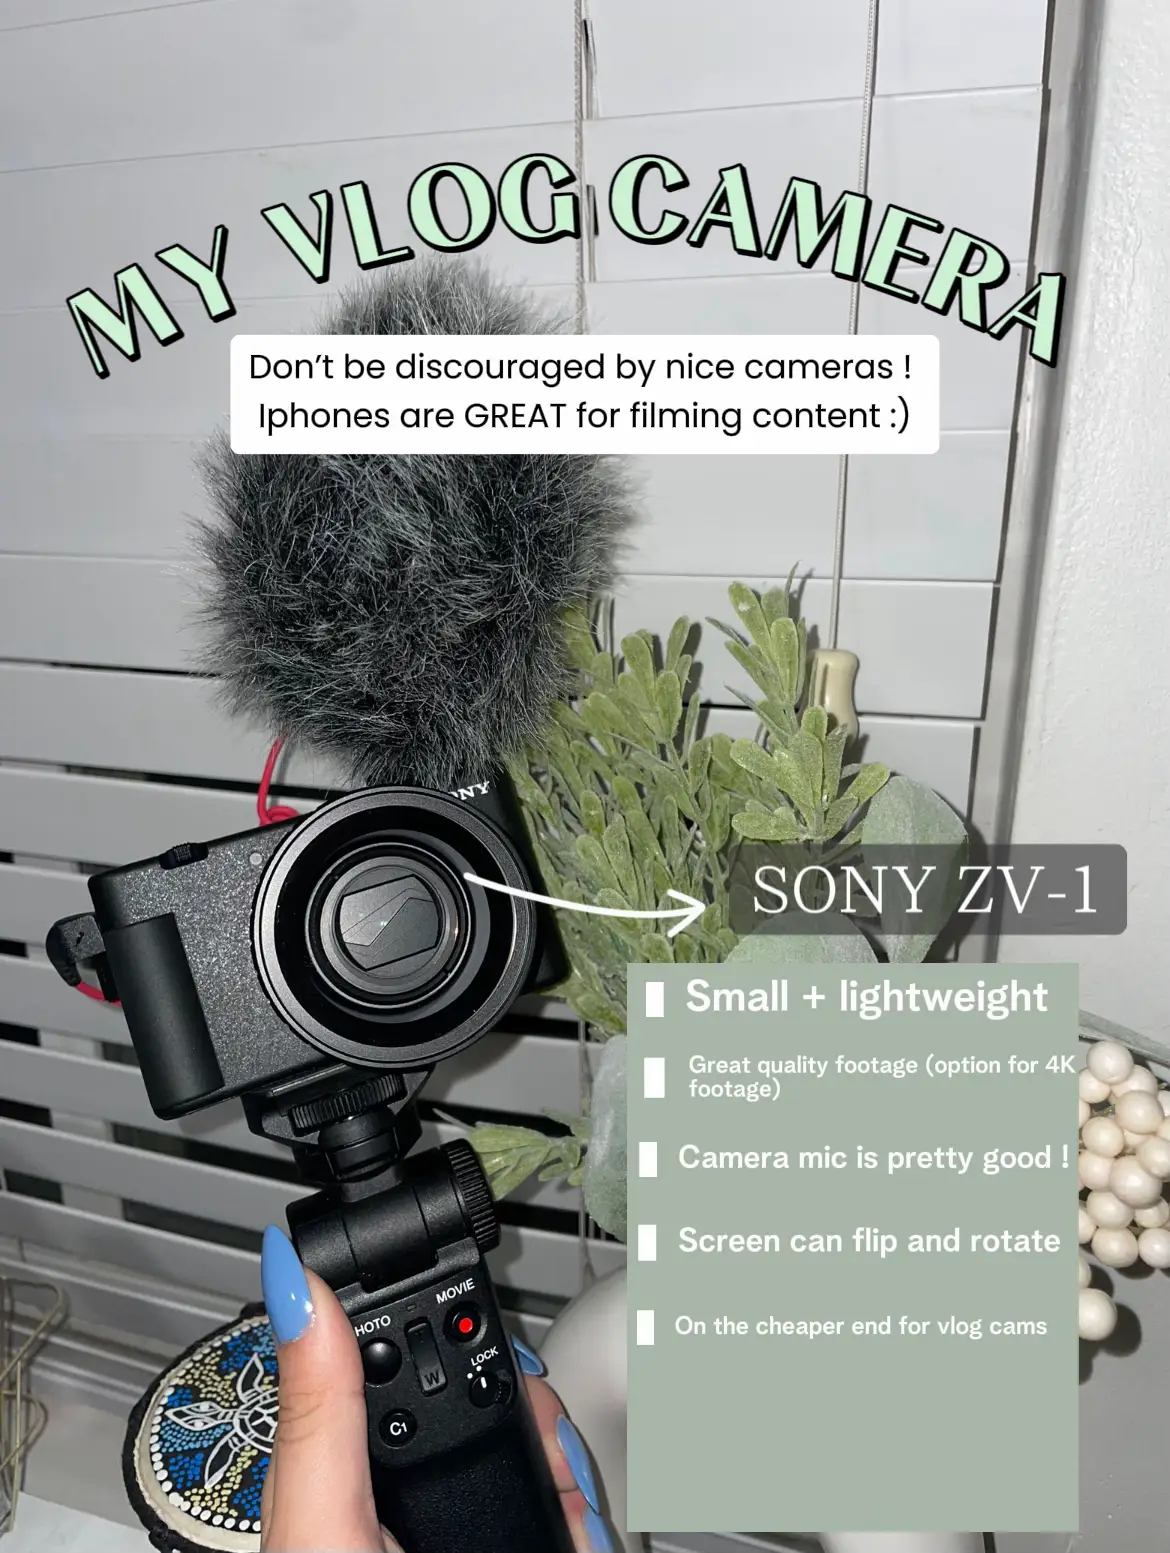  A person holding a vlog camera with a